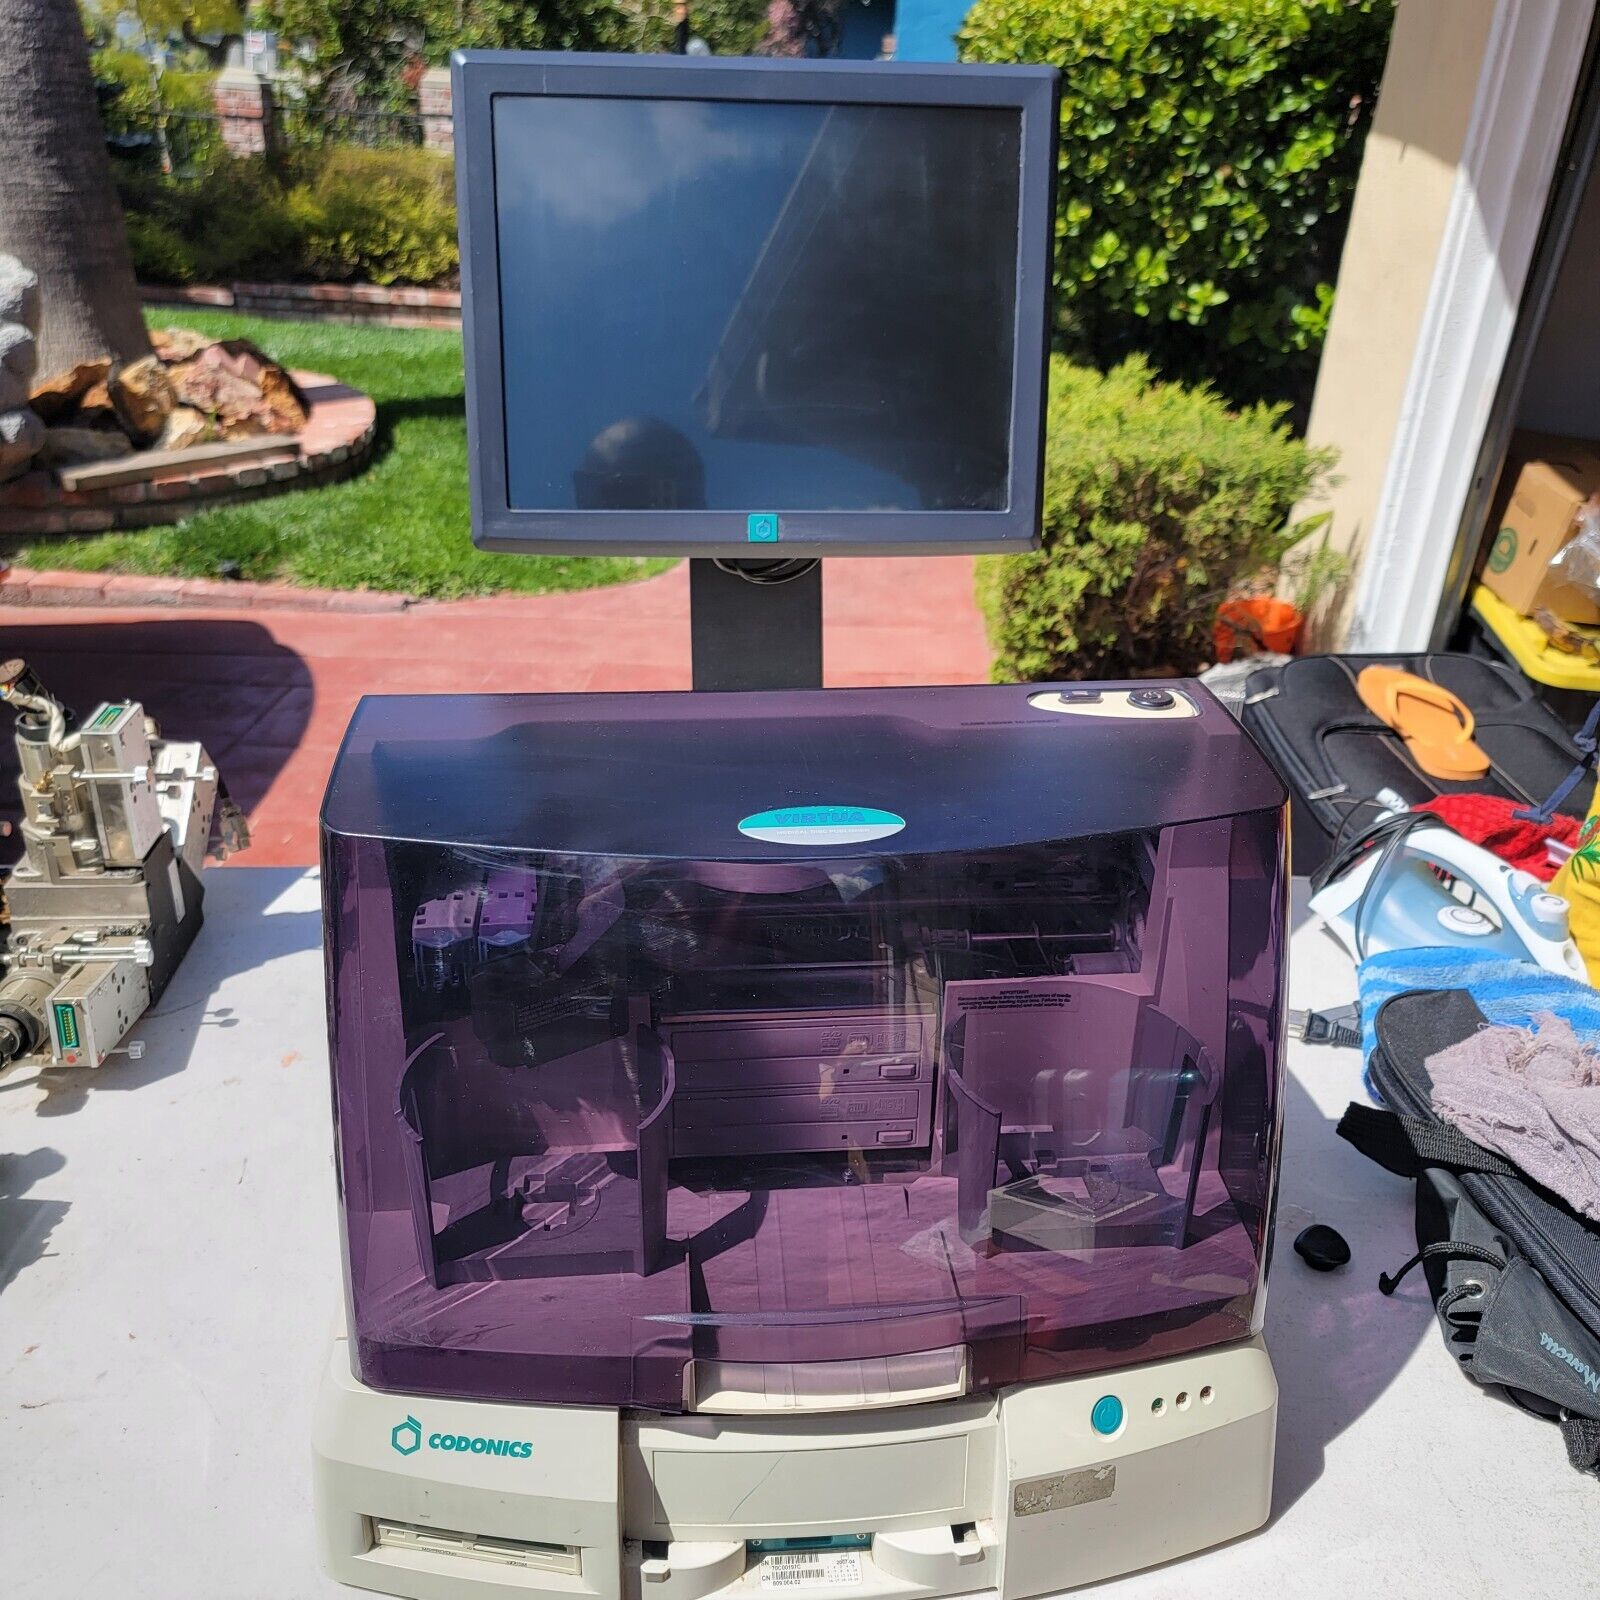 CODONICS VIRTUA MEDICAL DISC PUBLISHER WITH SCREEN AND PRINTER